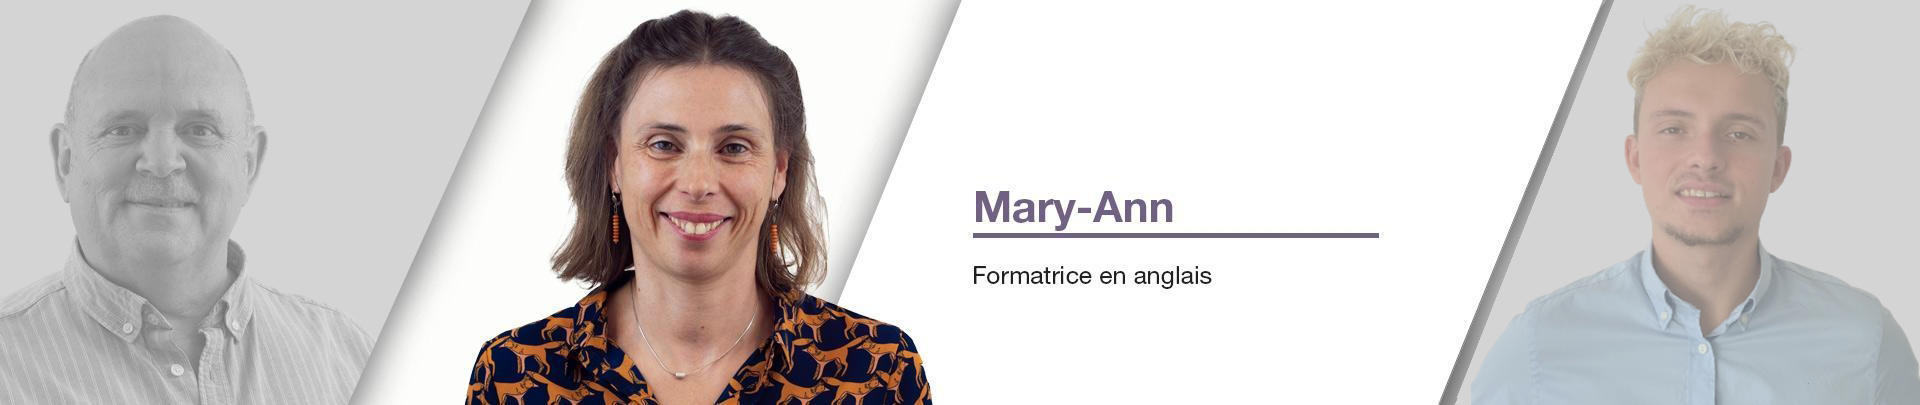  Mary-Anne - Formatrice en anglais